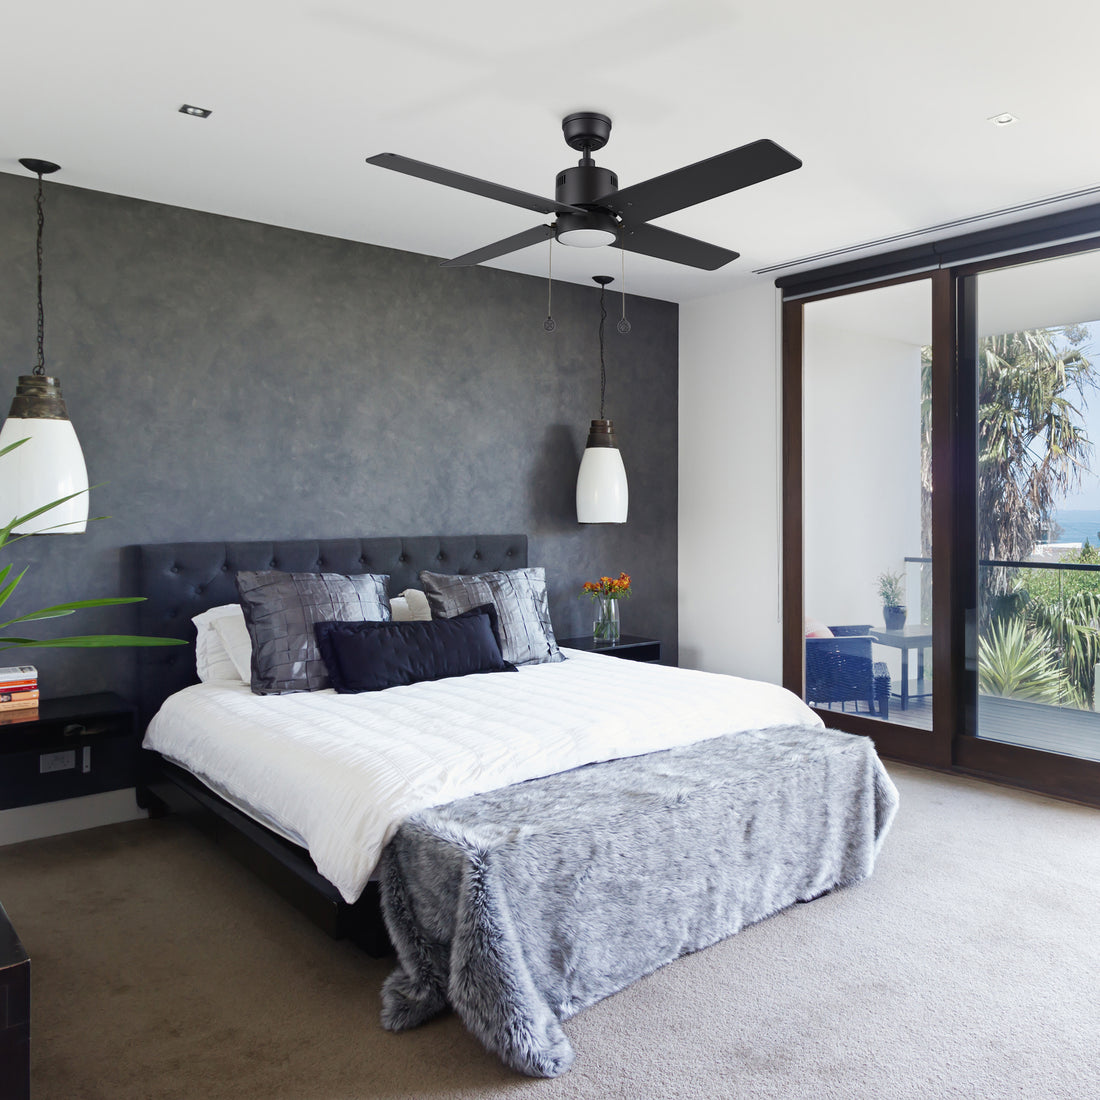 Carro Smafan Rowan 52 inch modern ceiling fan with LED light, black finish, and 4 Polywood blades in a stylish bedroom.